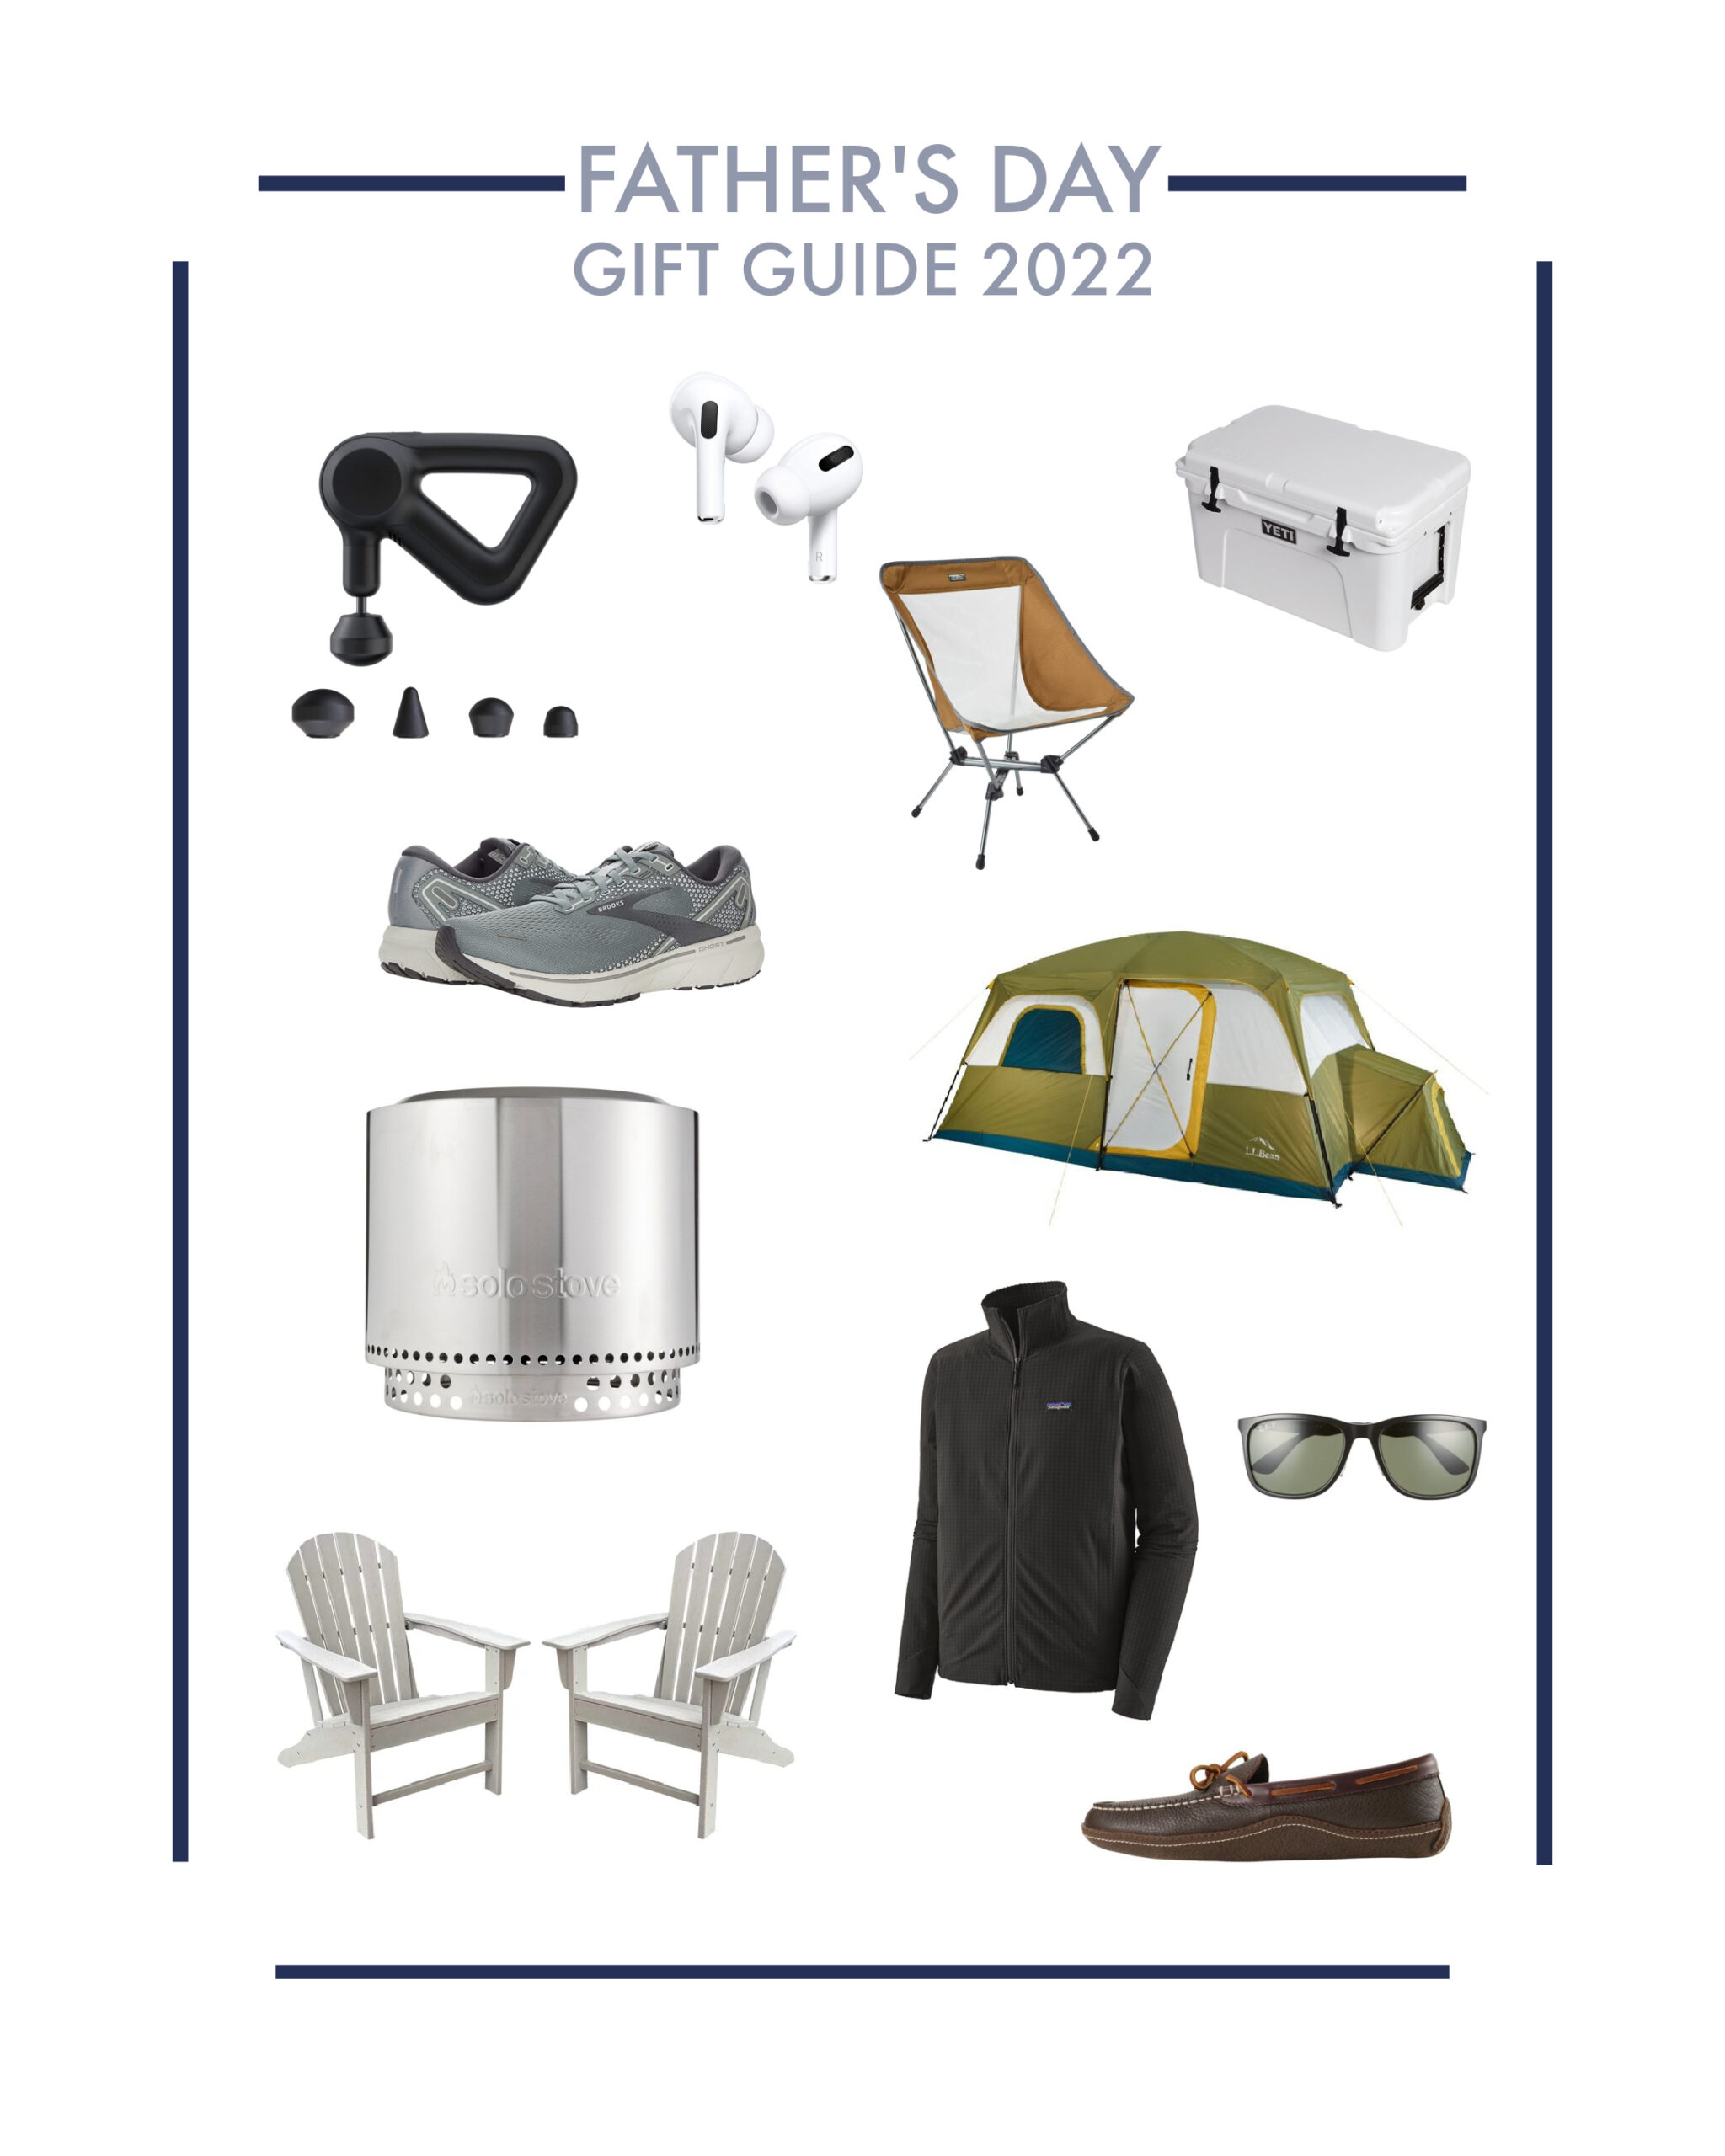 Father's Day is coming up and I thought it would be fun to make a little gift guide inspired by Chris and all the things he likes. Here's my Father's Day gift guide 2022!